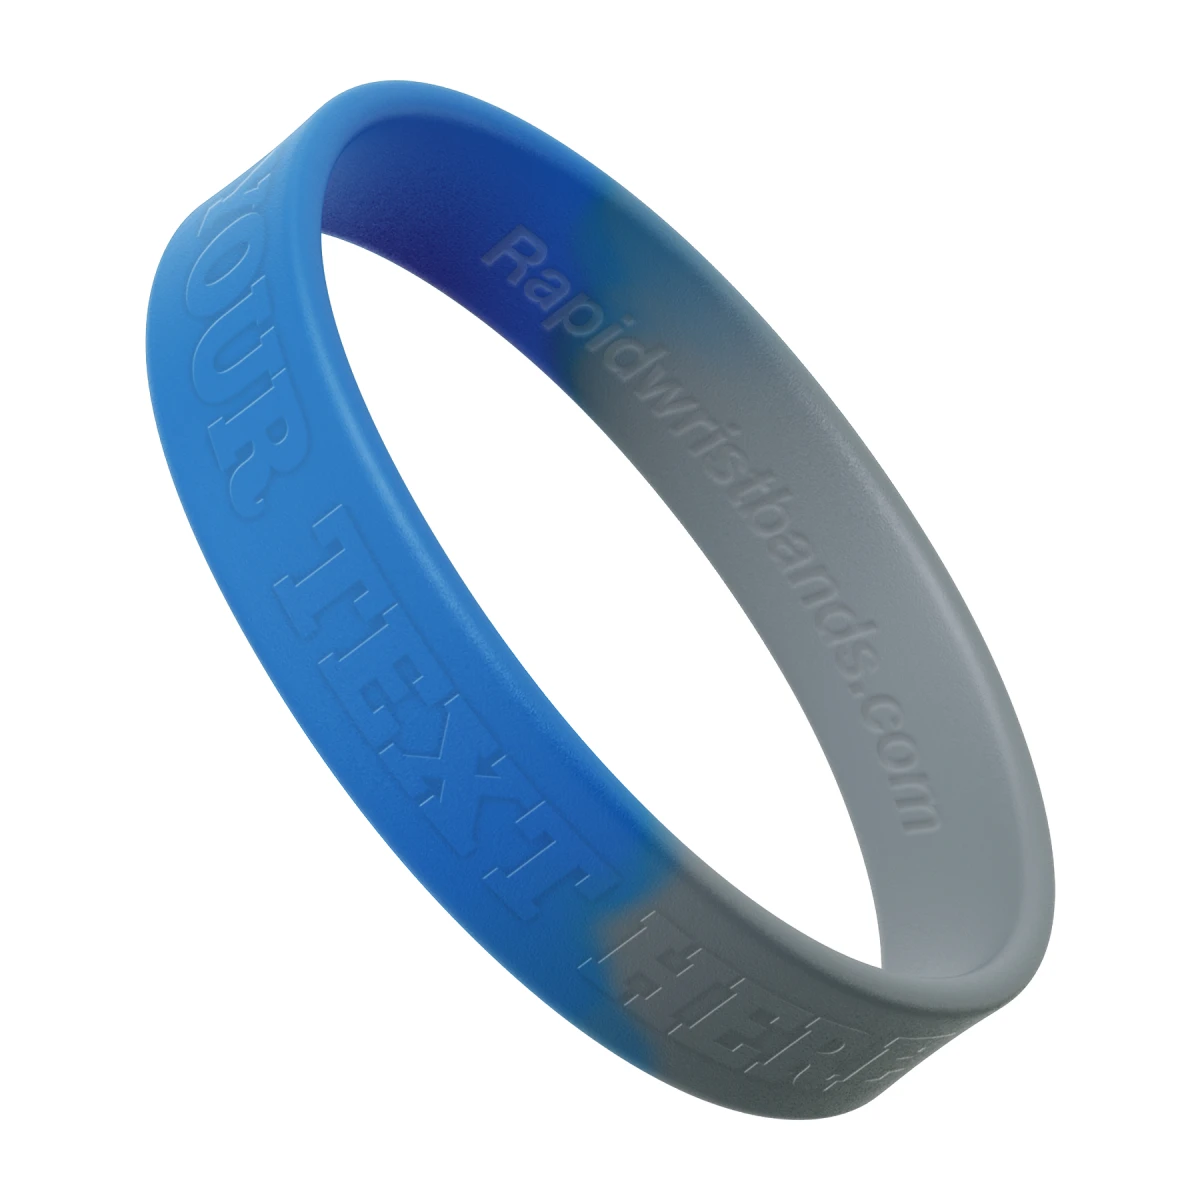 Segmented Blue/Gray Wristband With Your Text Here Embossed